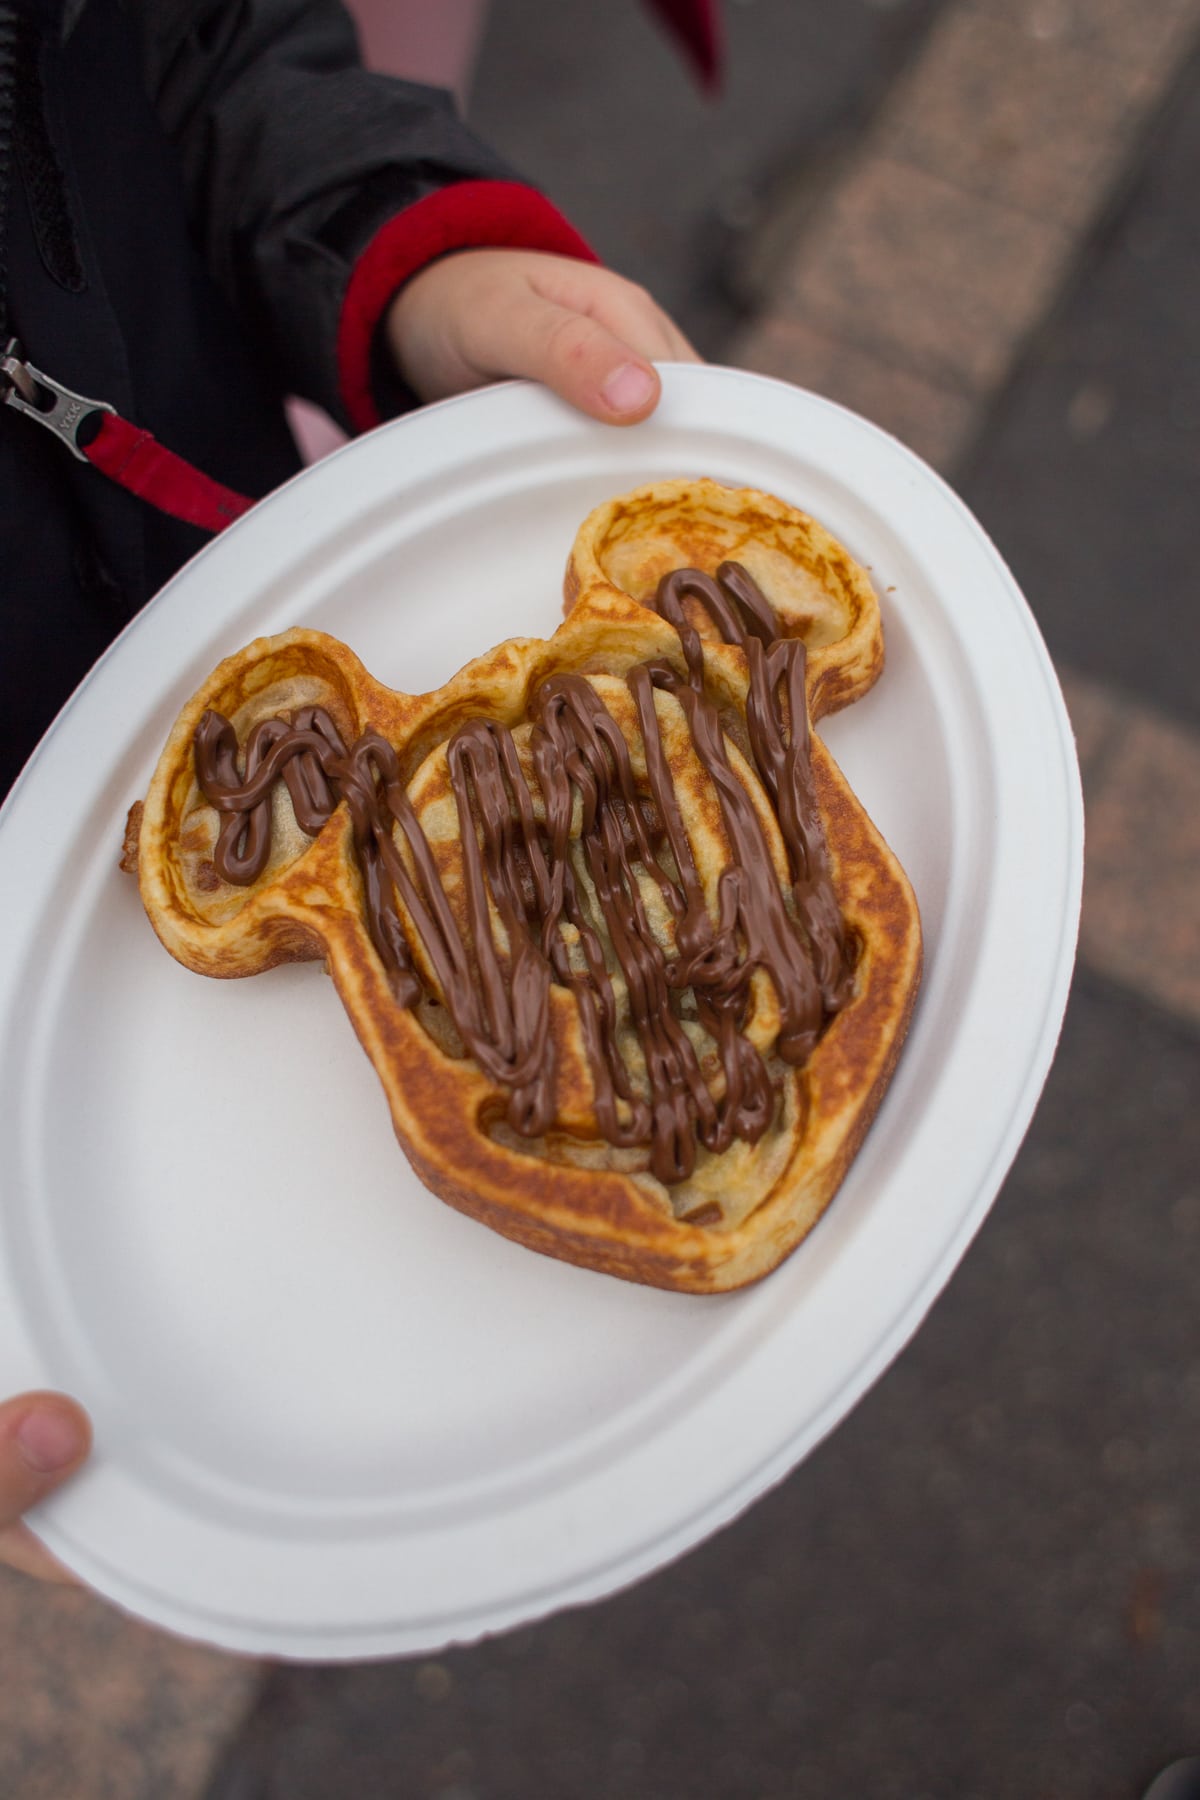 Mickey Mouse shaped waffle at Disneyland Paris by laurens_latest